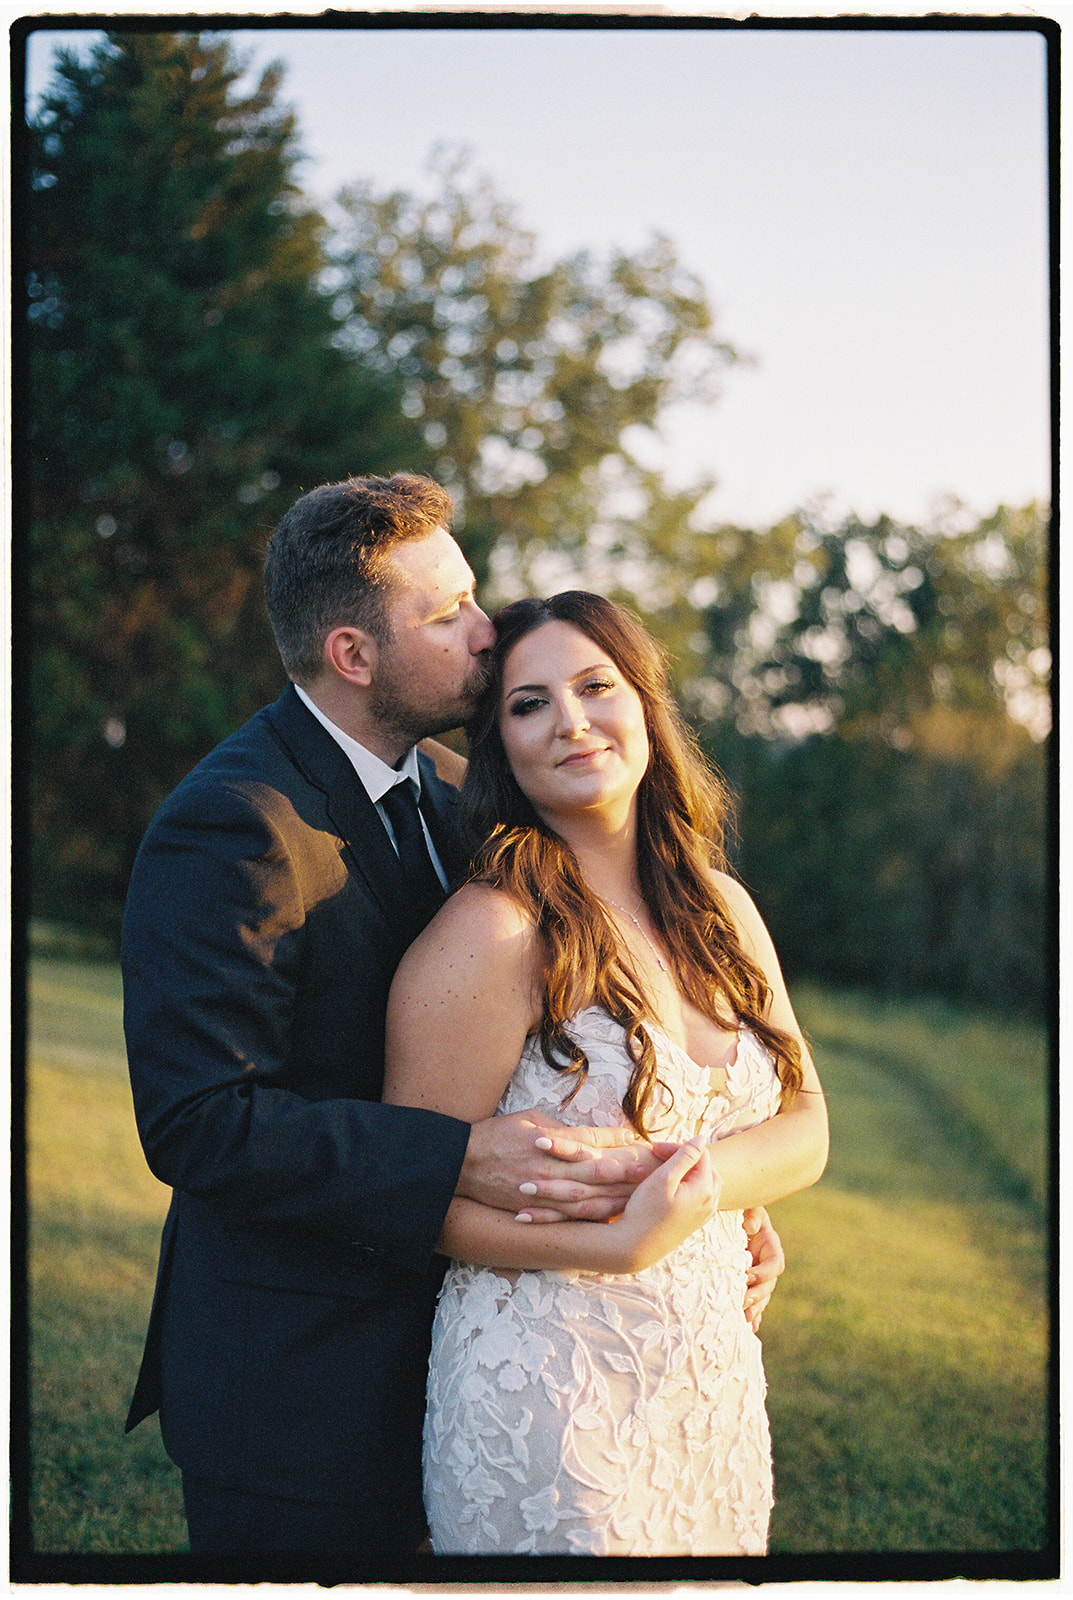 Newlyweds stand together in a field in a film photo from a Hybrid Wedding Photography